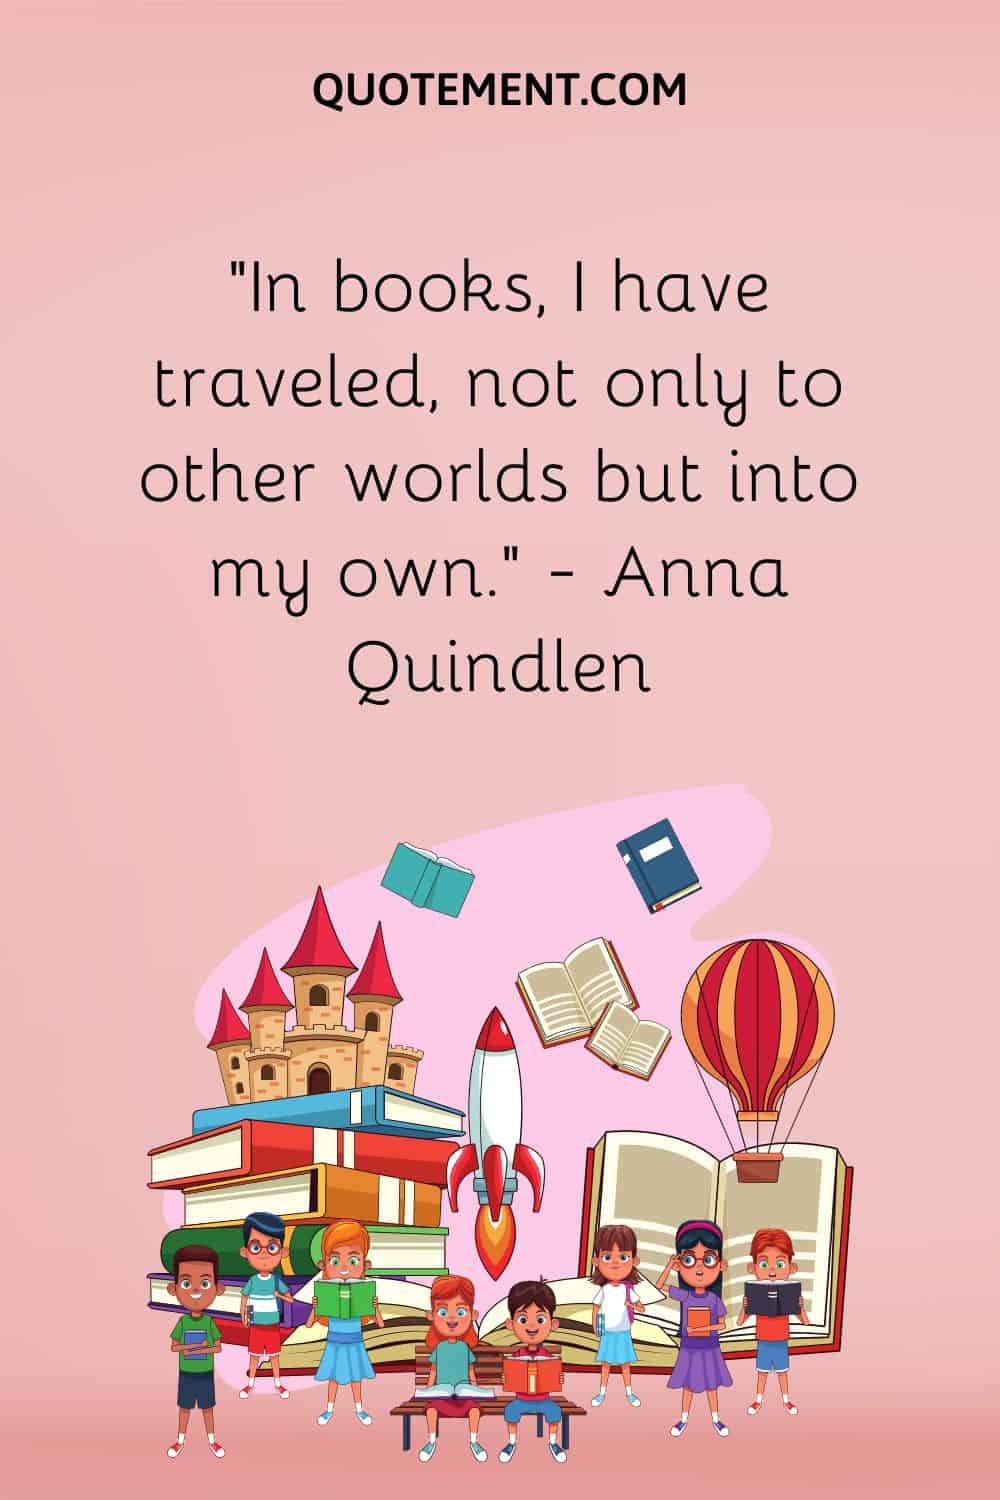 “In books, I have traveled, not only to other worlds but into my own.” — Anna Quindlen